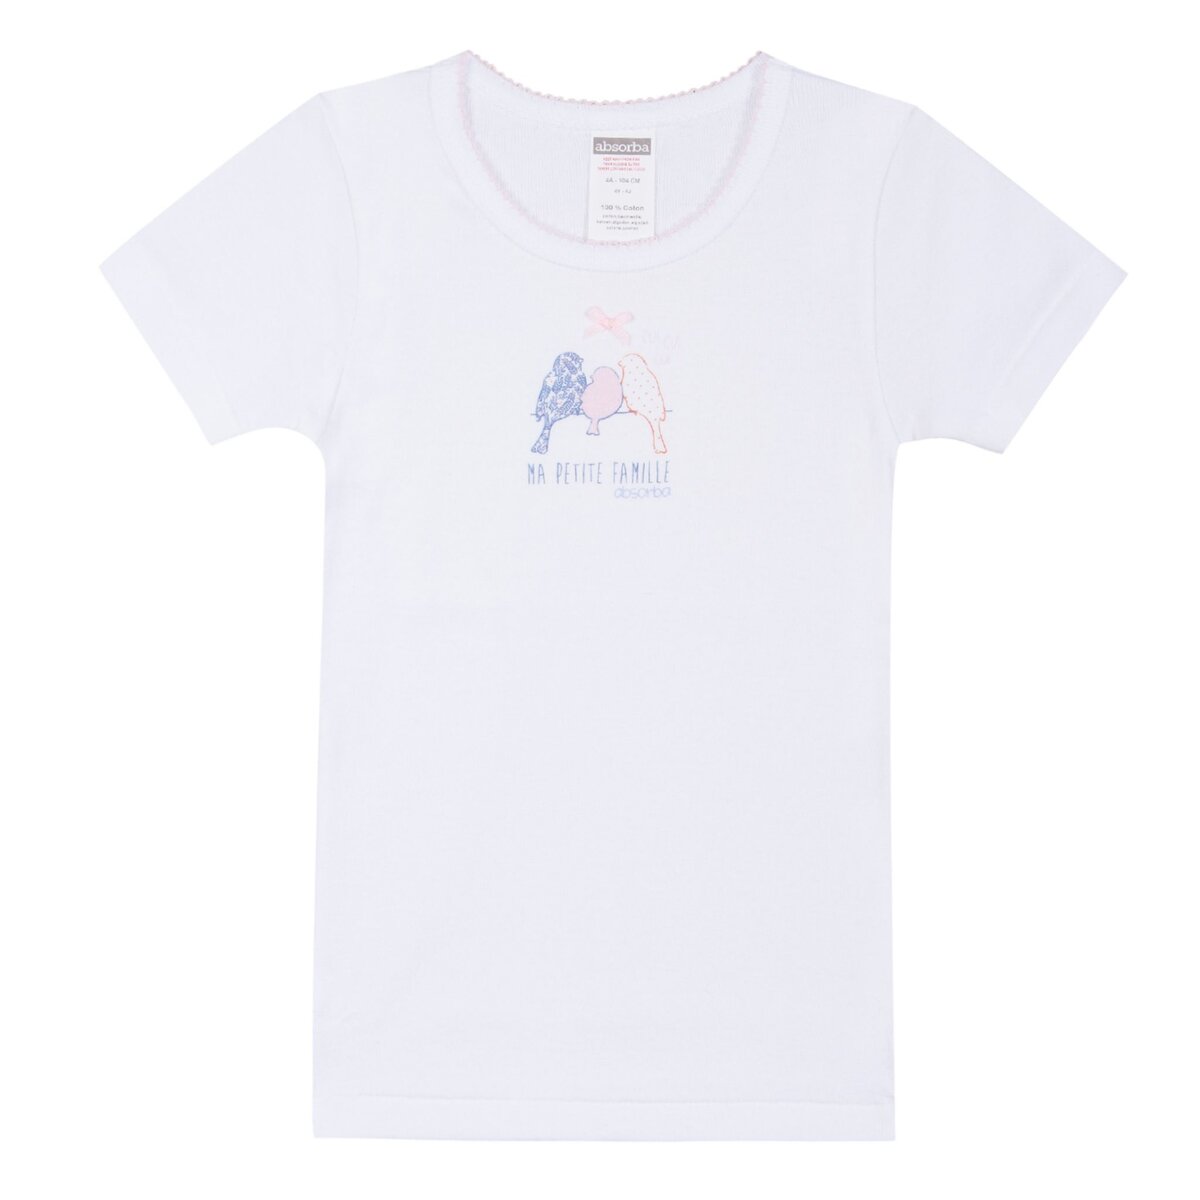 ABSORBA T-shirt manches courtes fille